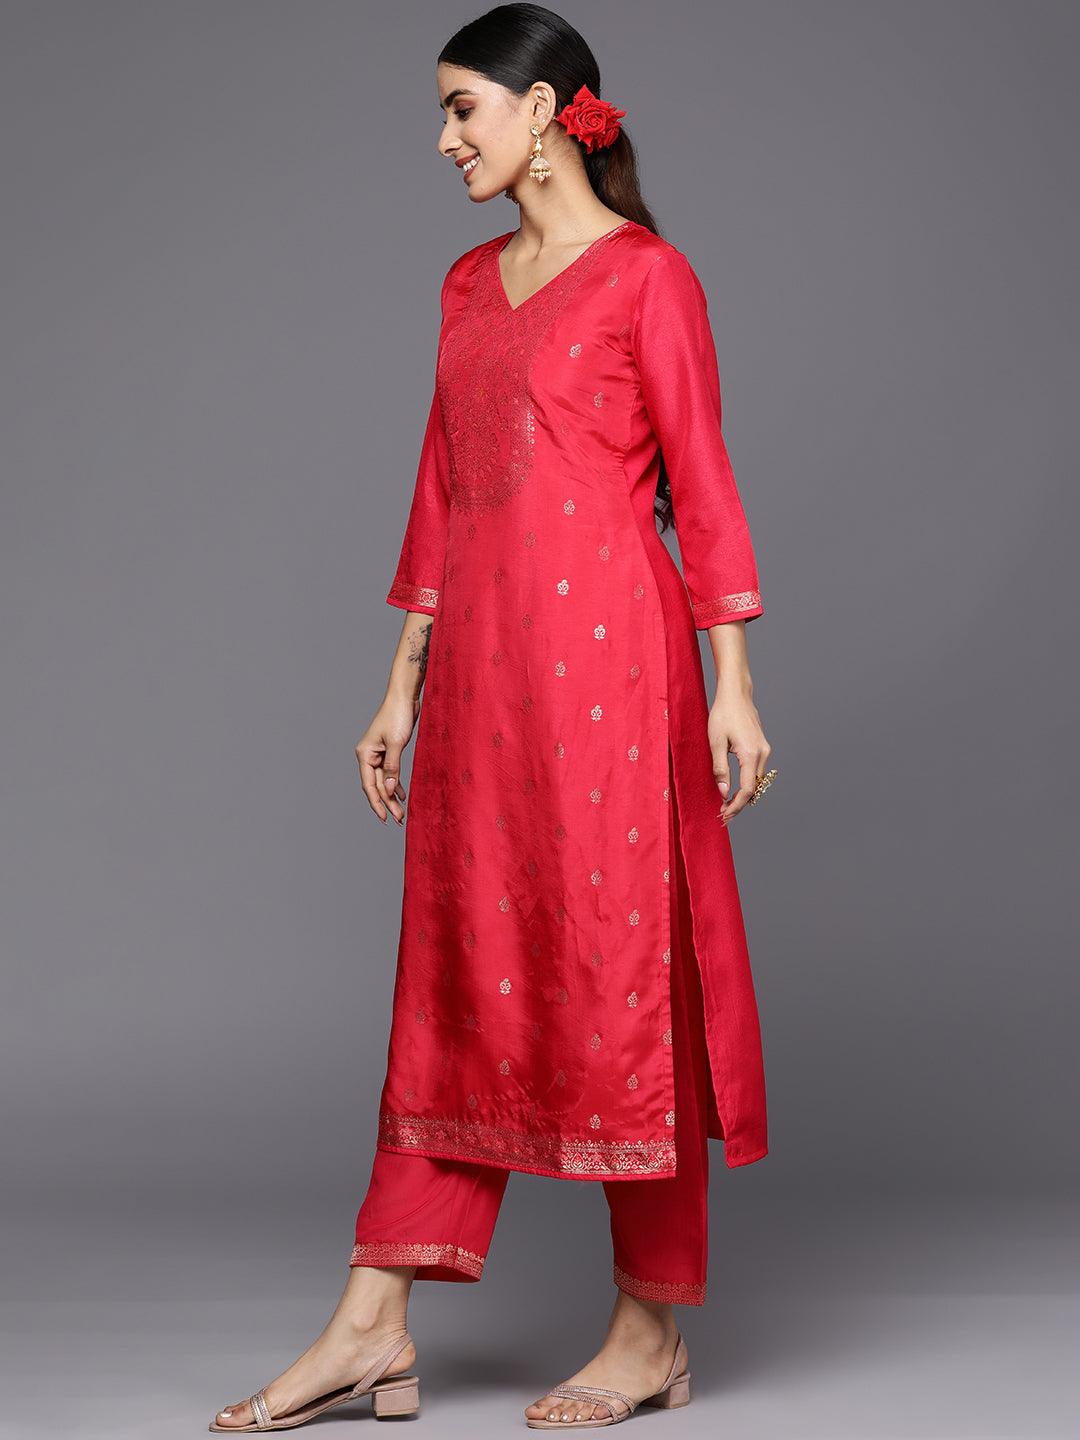 Coral Self Design Silk Blend Straight Suit Set With Trousers - Libas